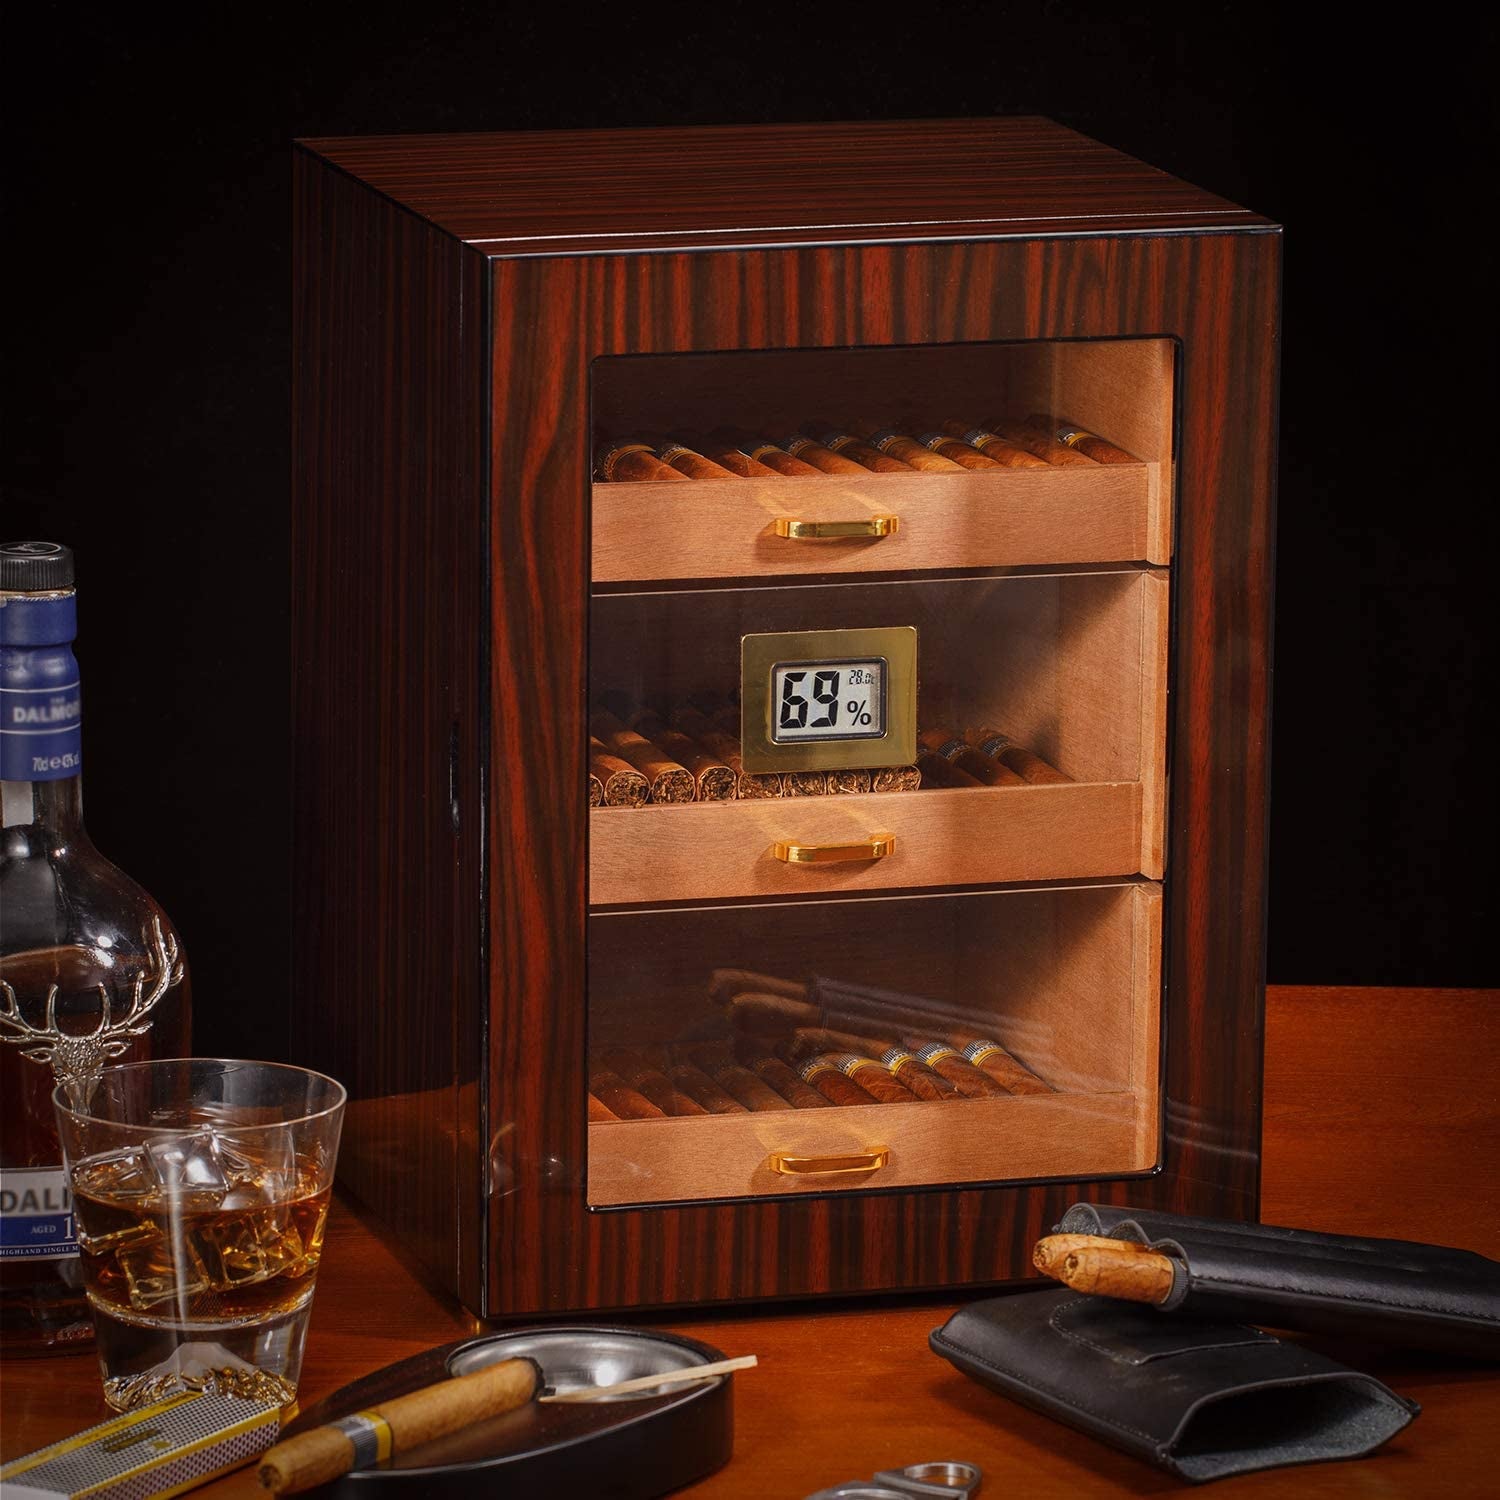 Cigar Humidor Cabinet with Digital Hygrometer for 100 to 150 Counts, Spanish Cedar Lined Cigar Box with 3 Large Drawers, 2 Crystal Gel Humidifiers, Glossy Ebony Finish, Great Gift for Father